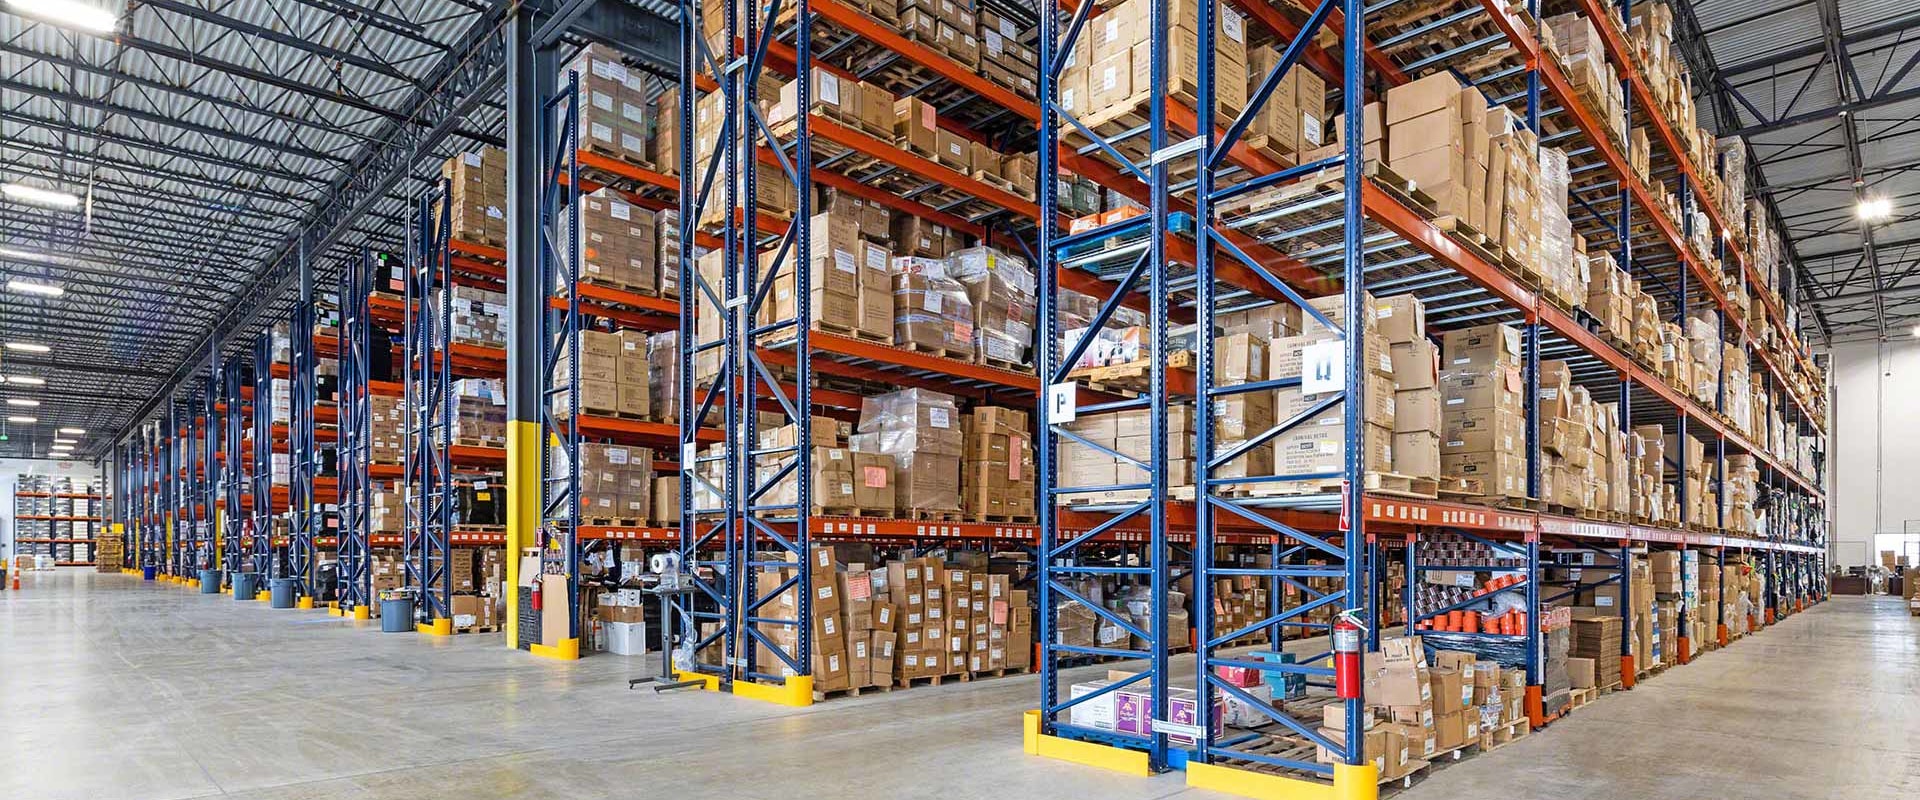 Finding the Right Commercial Storage Facility in Miami